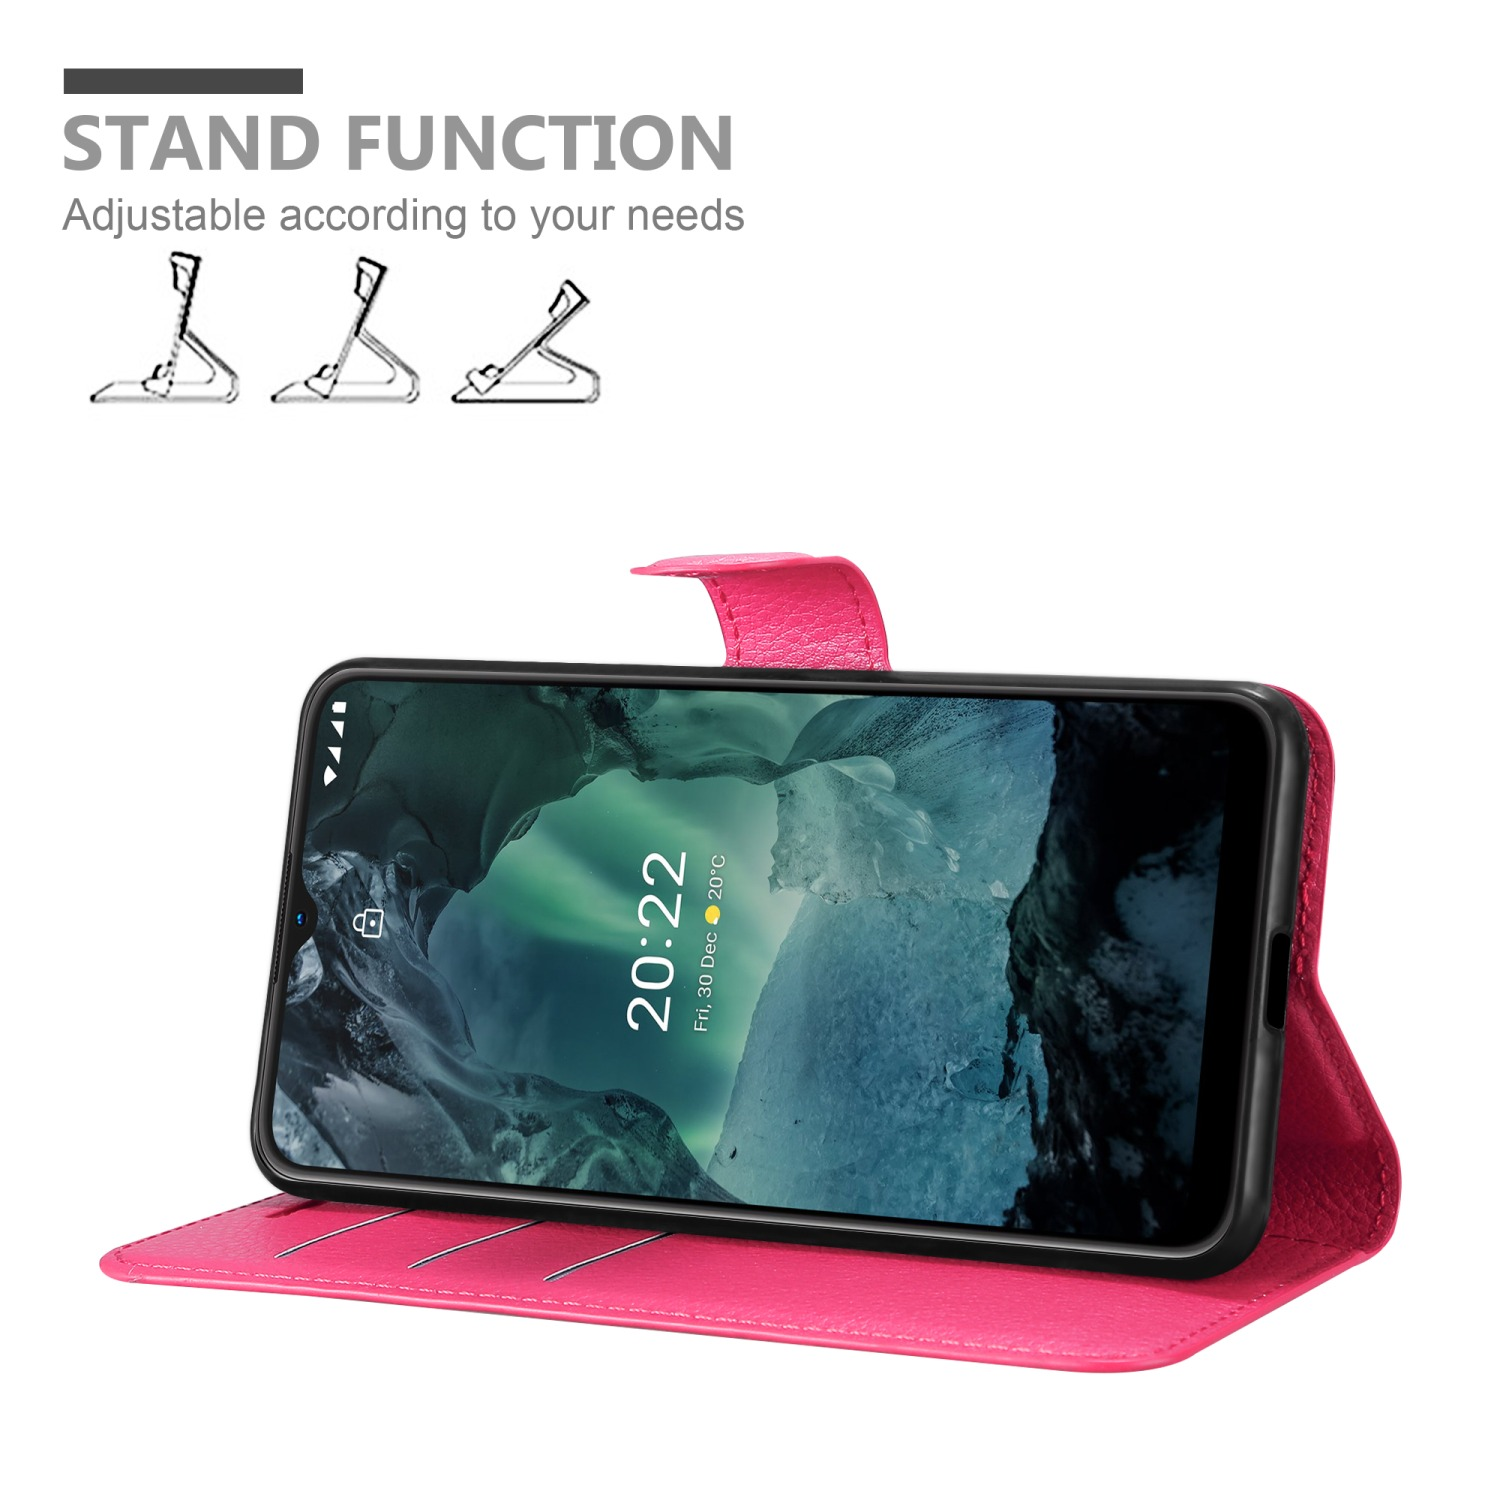 Standfunktion, G21, PINK Nokia, Book CHERRY G11 Bookcover, / Hülle CADORABO